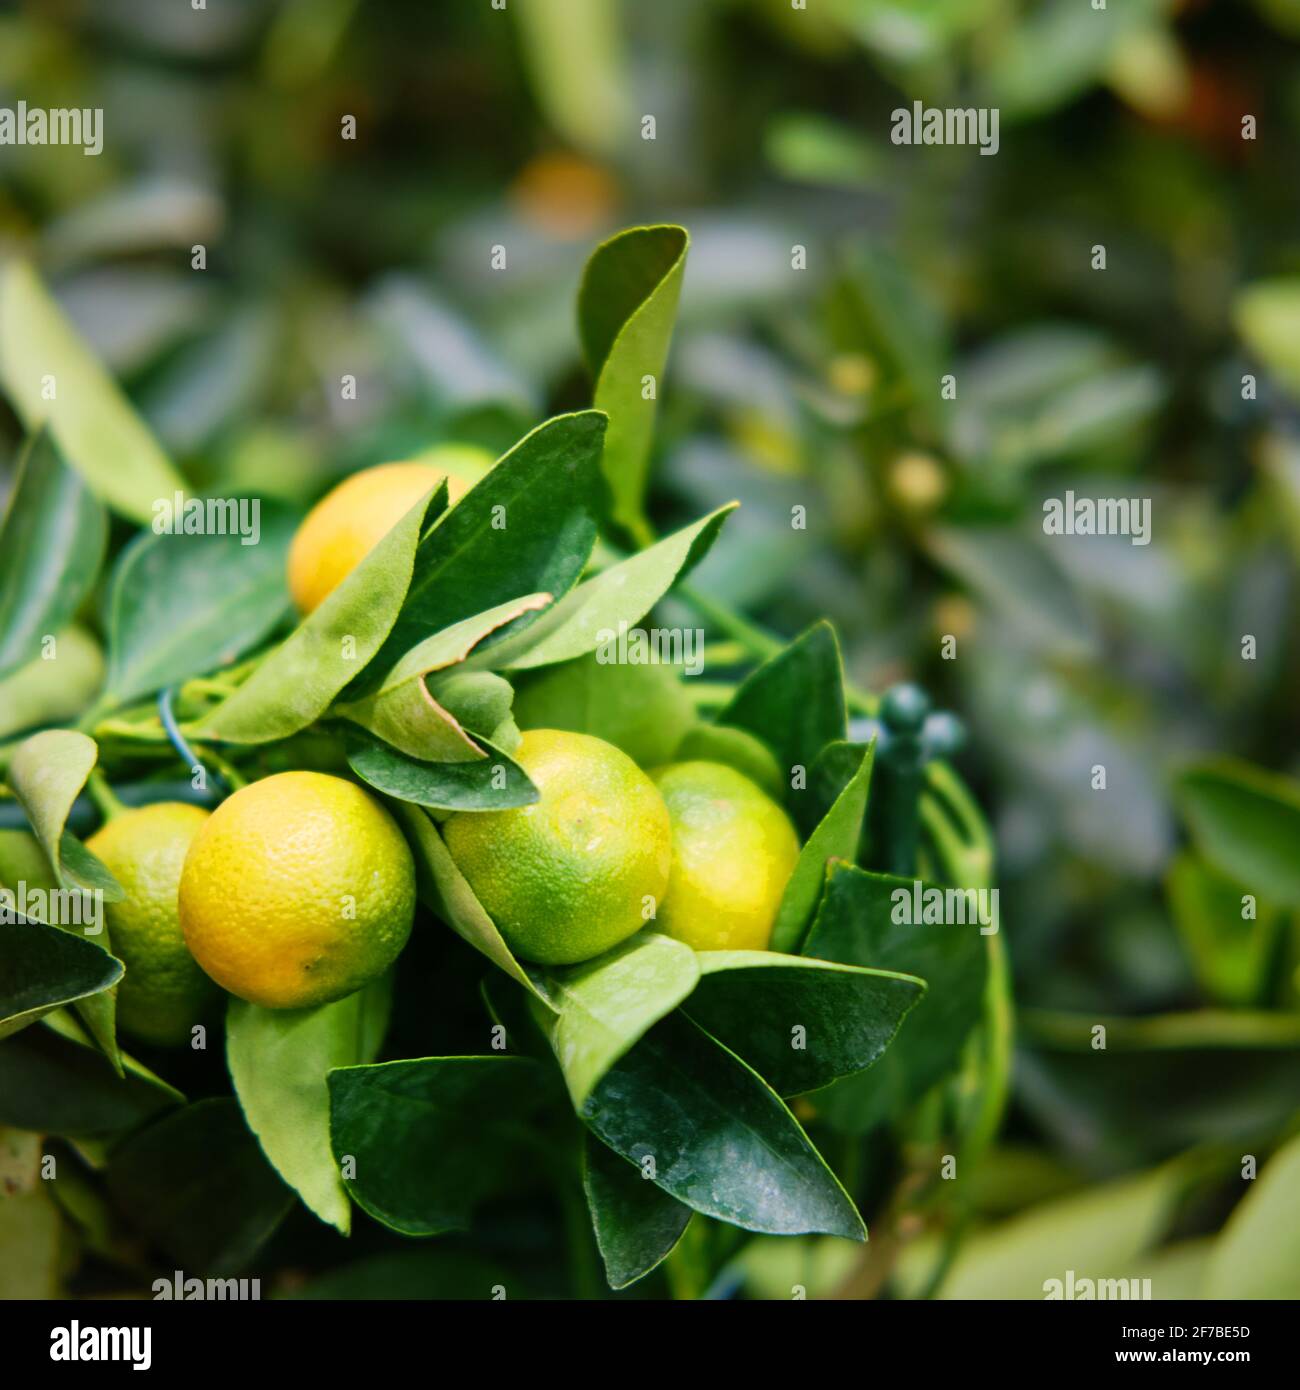 Calamondin, or citrofortunella, is an ornamental citrus plant that blooms profusely and bears fruit, and grows well at home. Stock Photo